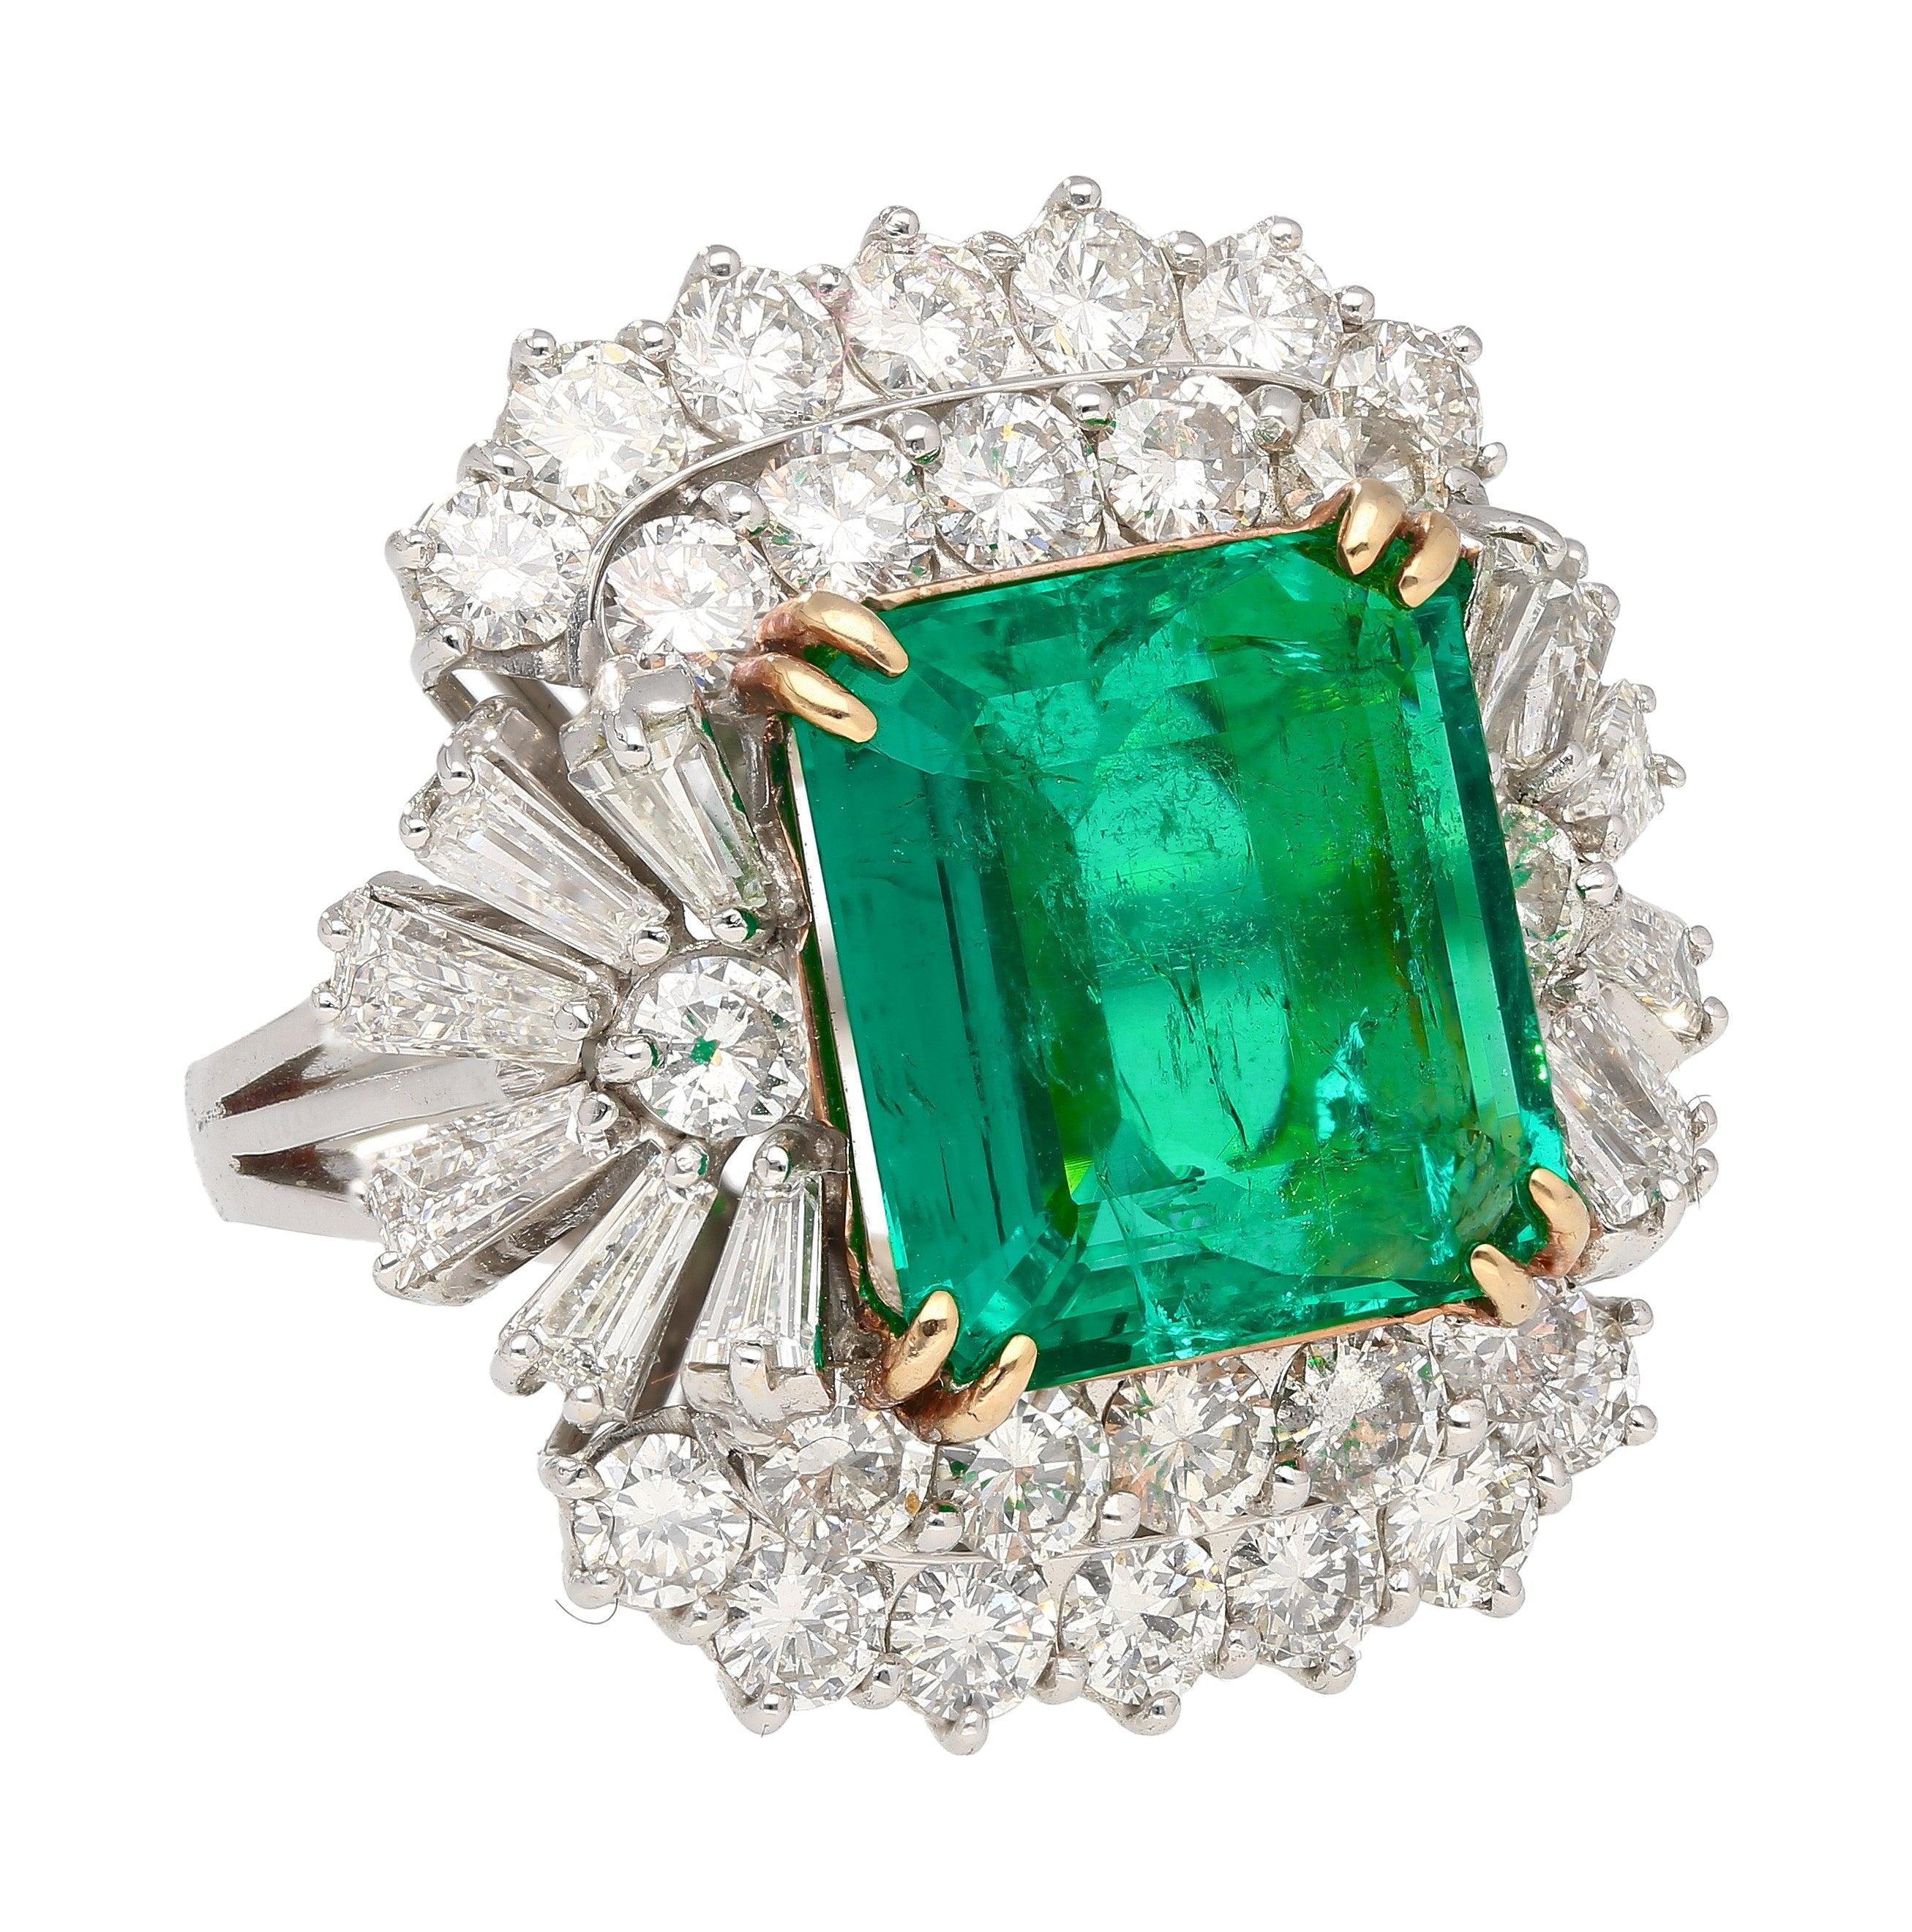 6.26 Carat Emerald Cut Emerald with Trillion and Round Cut Diamond Side Stone Ring in 18K White, Yellow Gold-Rings-ASSAY